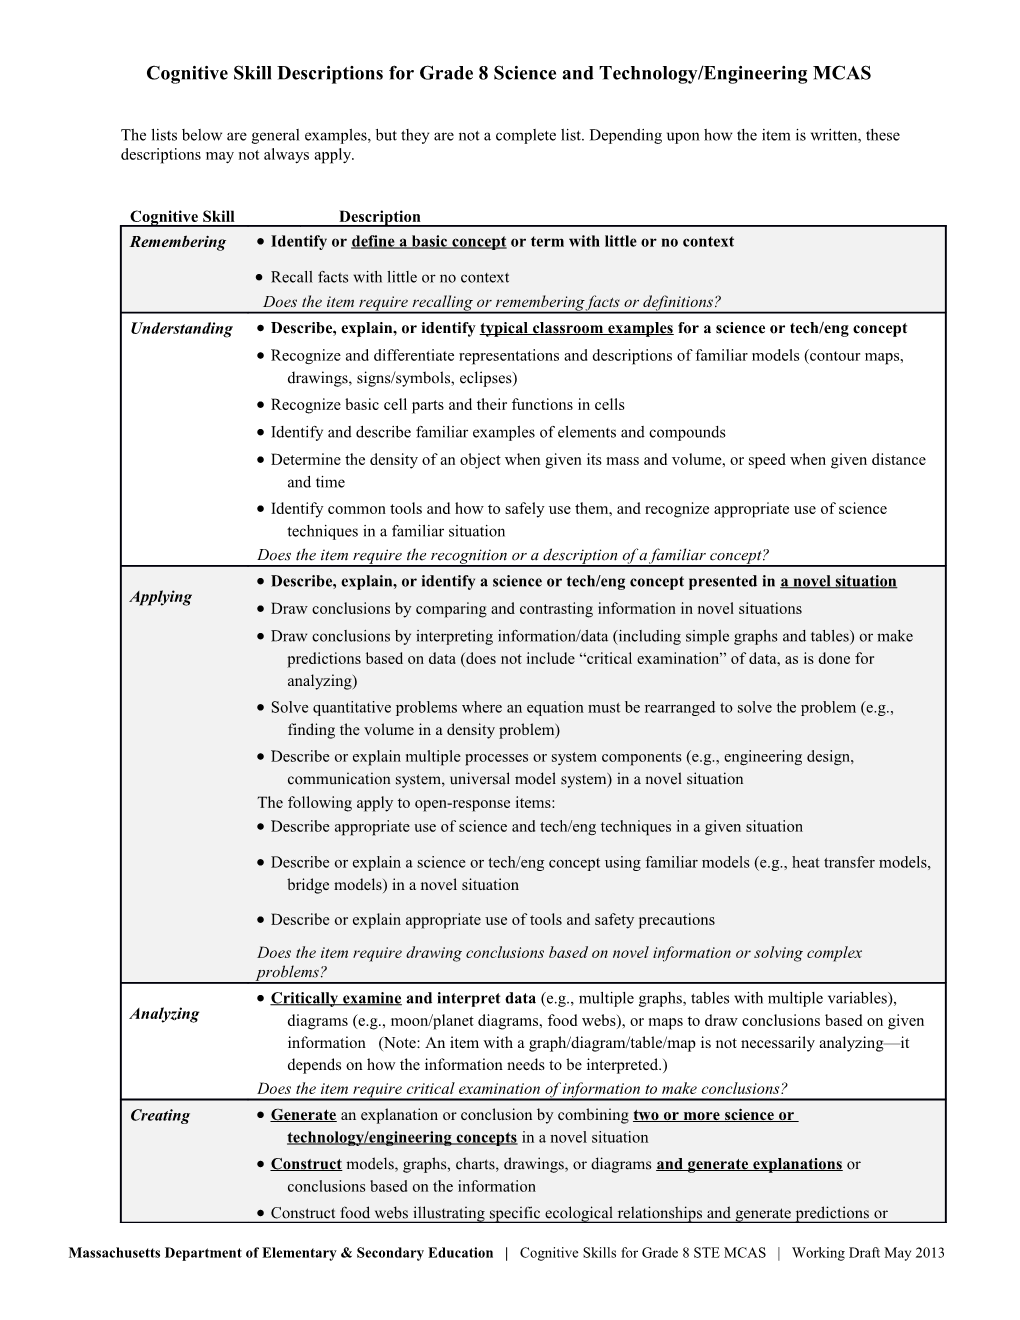 Cognitive Skill Descriptions for Grade 8 Science and Technology/Engineering MCAS